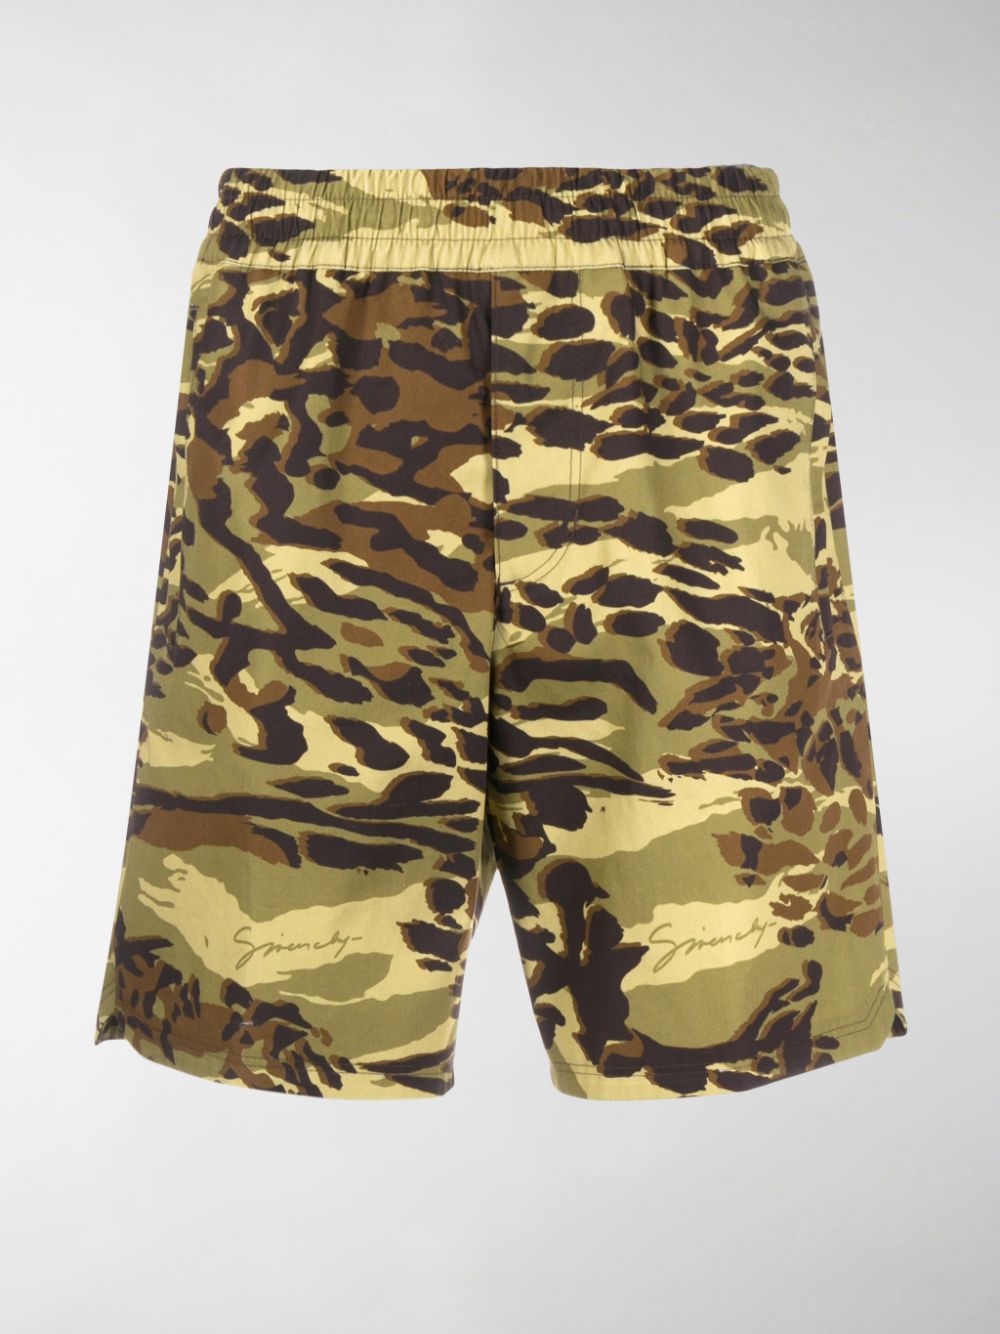 GIVENCHY SPIRIT CAMOUFLAGE 短裤,14995882